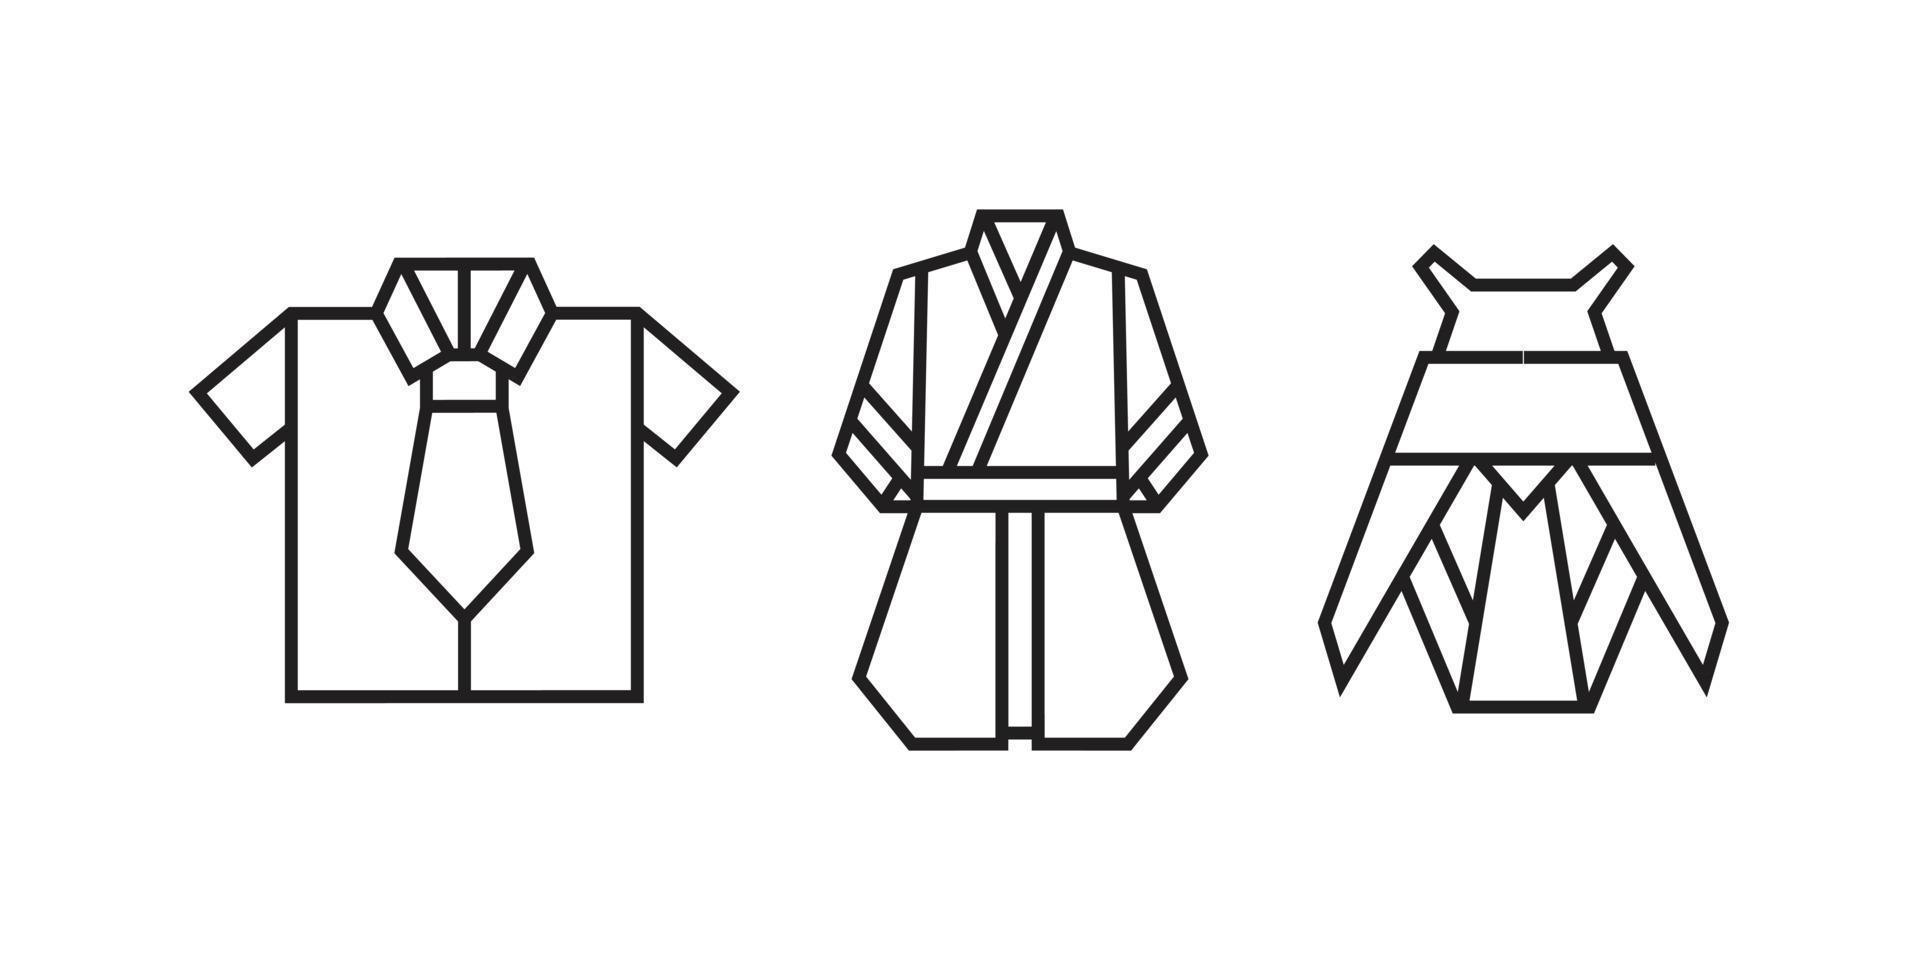 Clothes illustrations in origami style vector